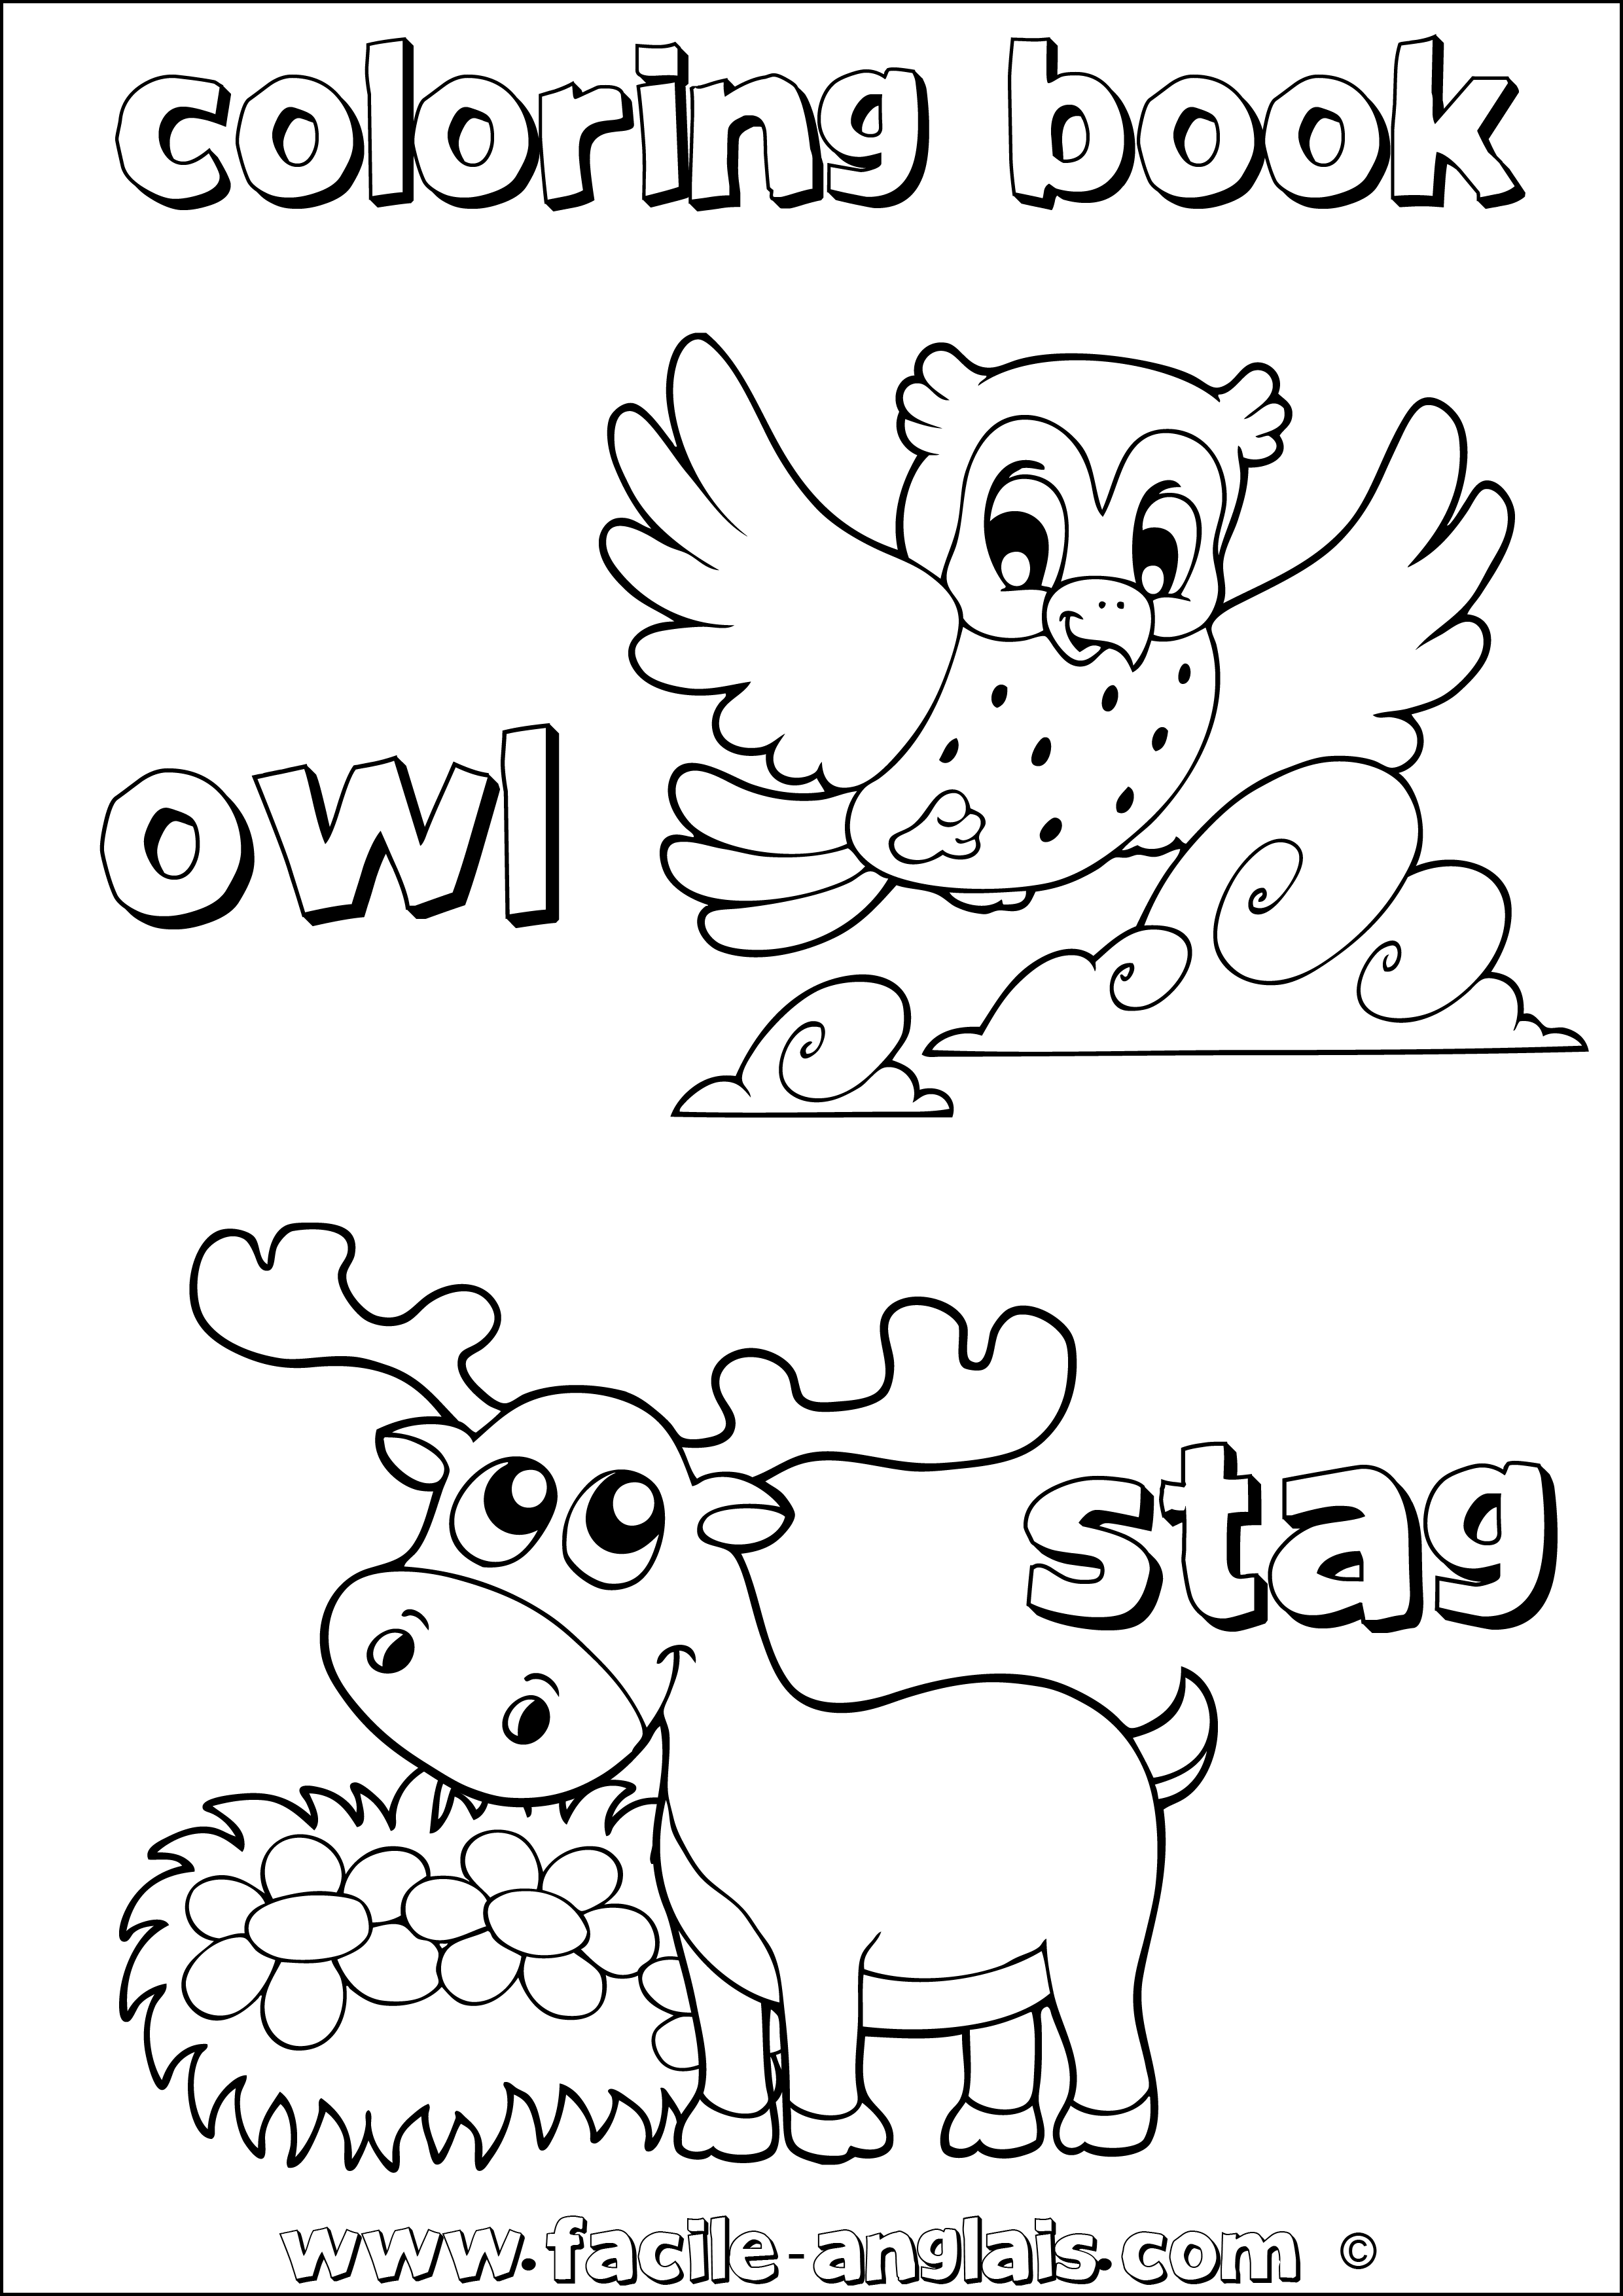 coloring book book stag owl